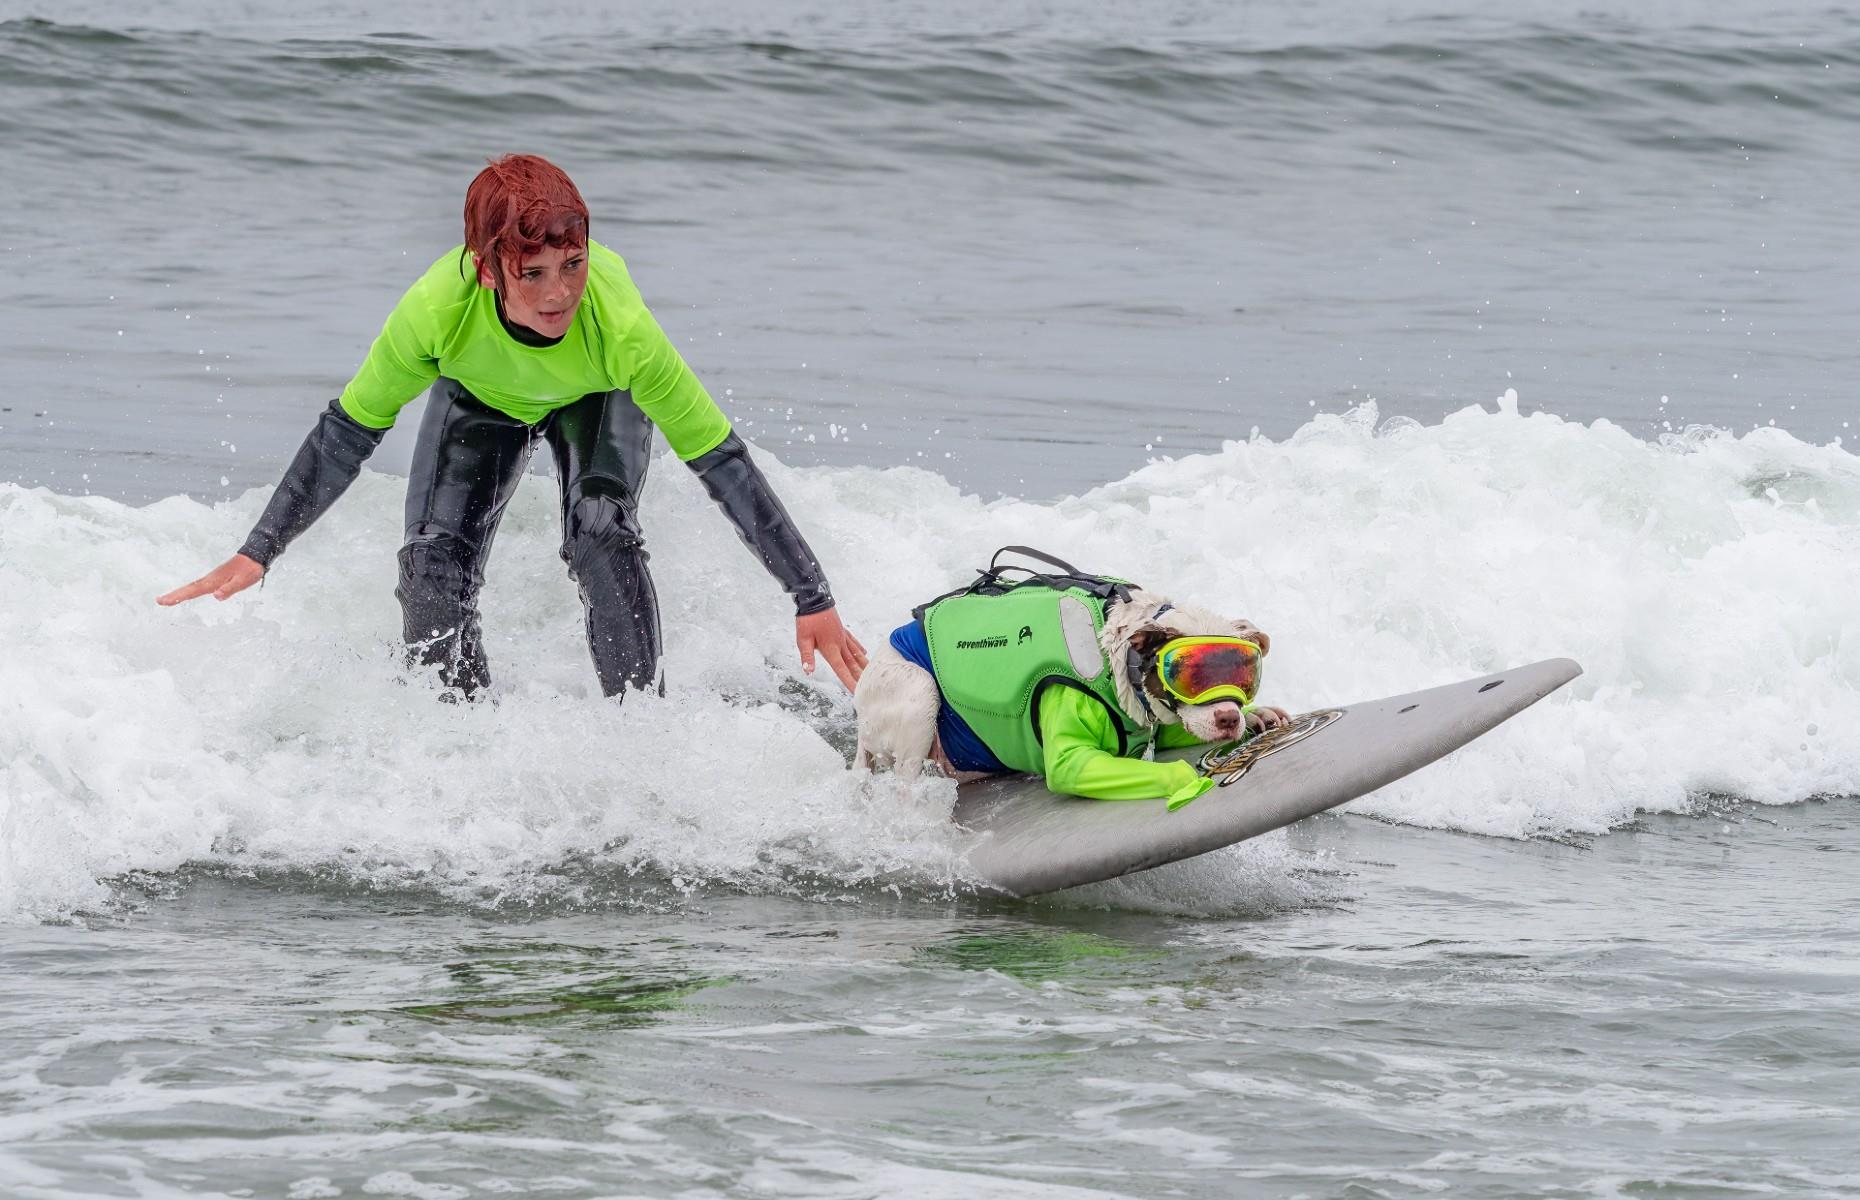 14 photos of surfing dogs to brighten up your day